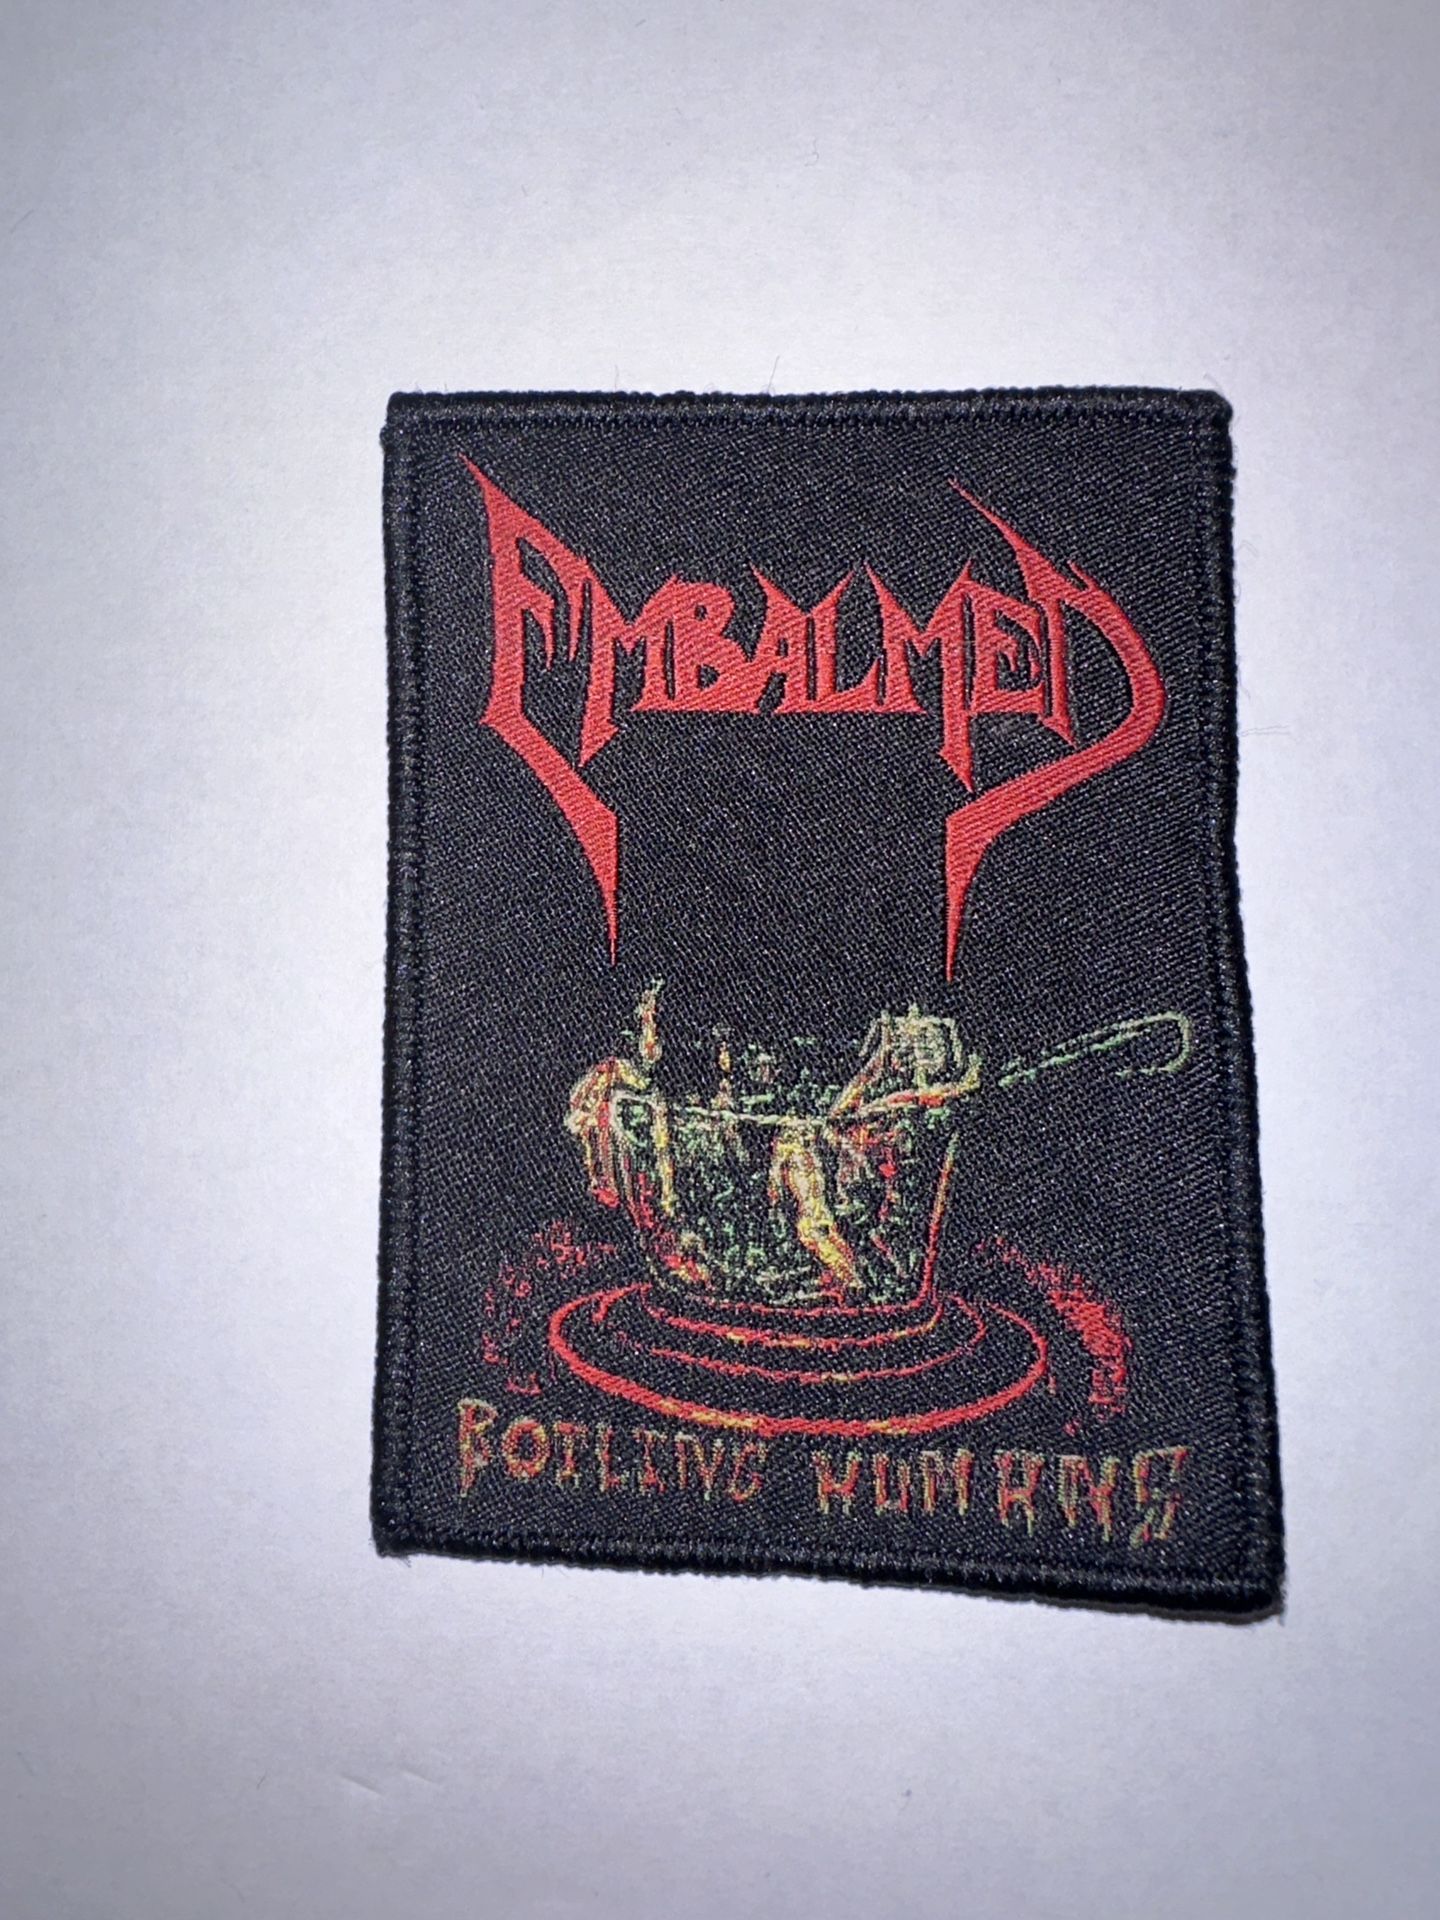 EMBALMED, BOILING HUMANS, SEW ON, WOVEN PATCH